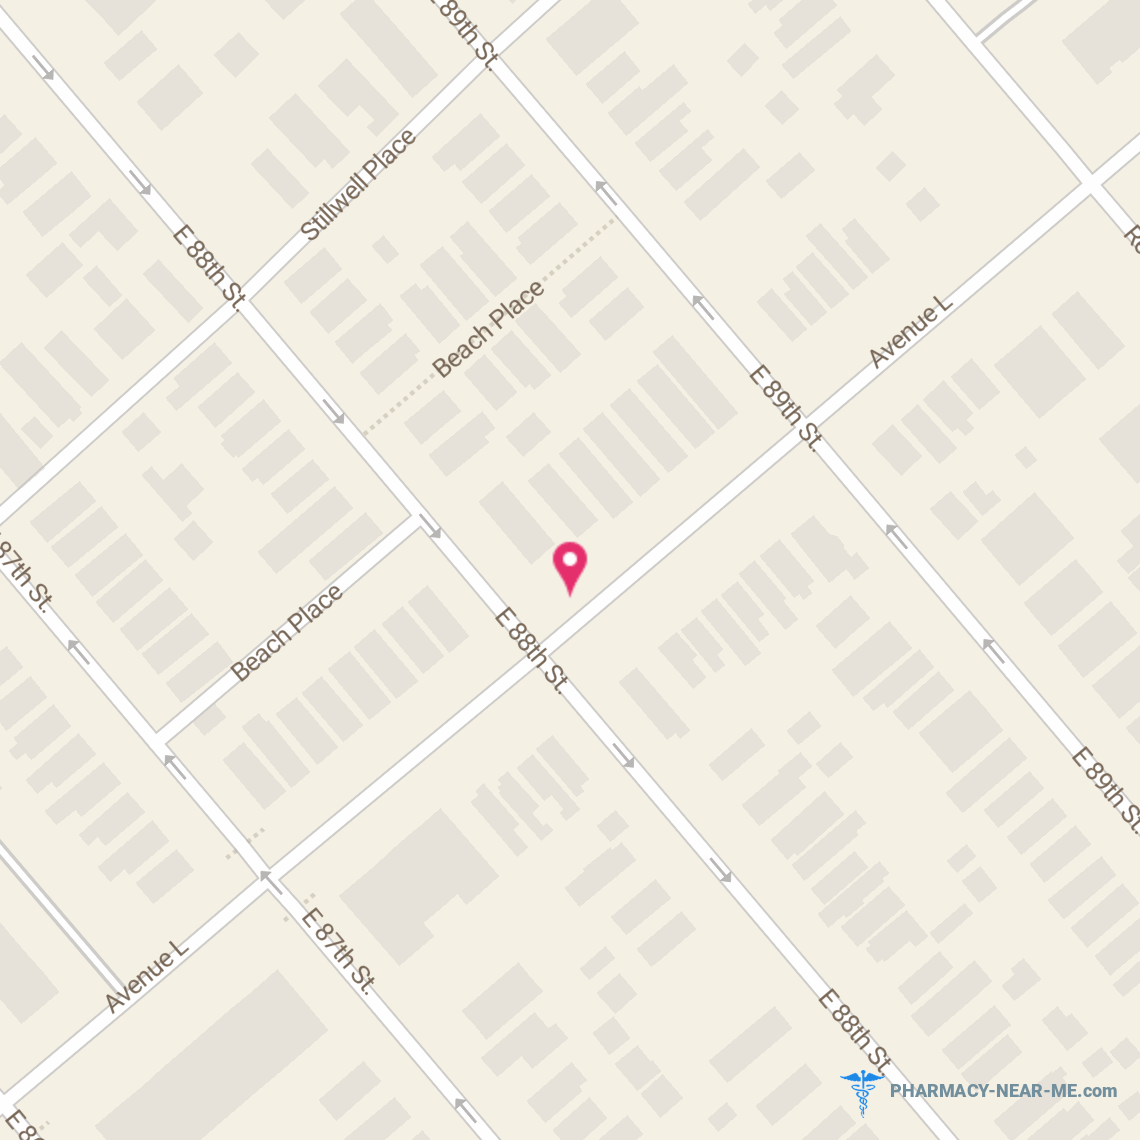 REMSEN PHARMACY - Pharmacy Hours, Phone, Reviews & Information: 8823 Avenue L, Brooklyn, New York 11236, United States